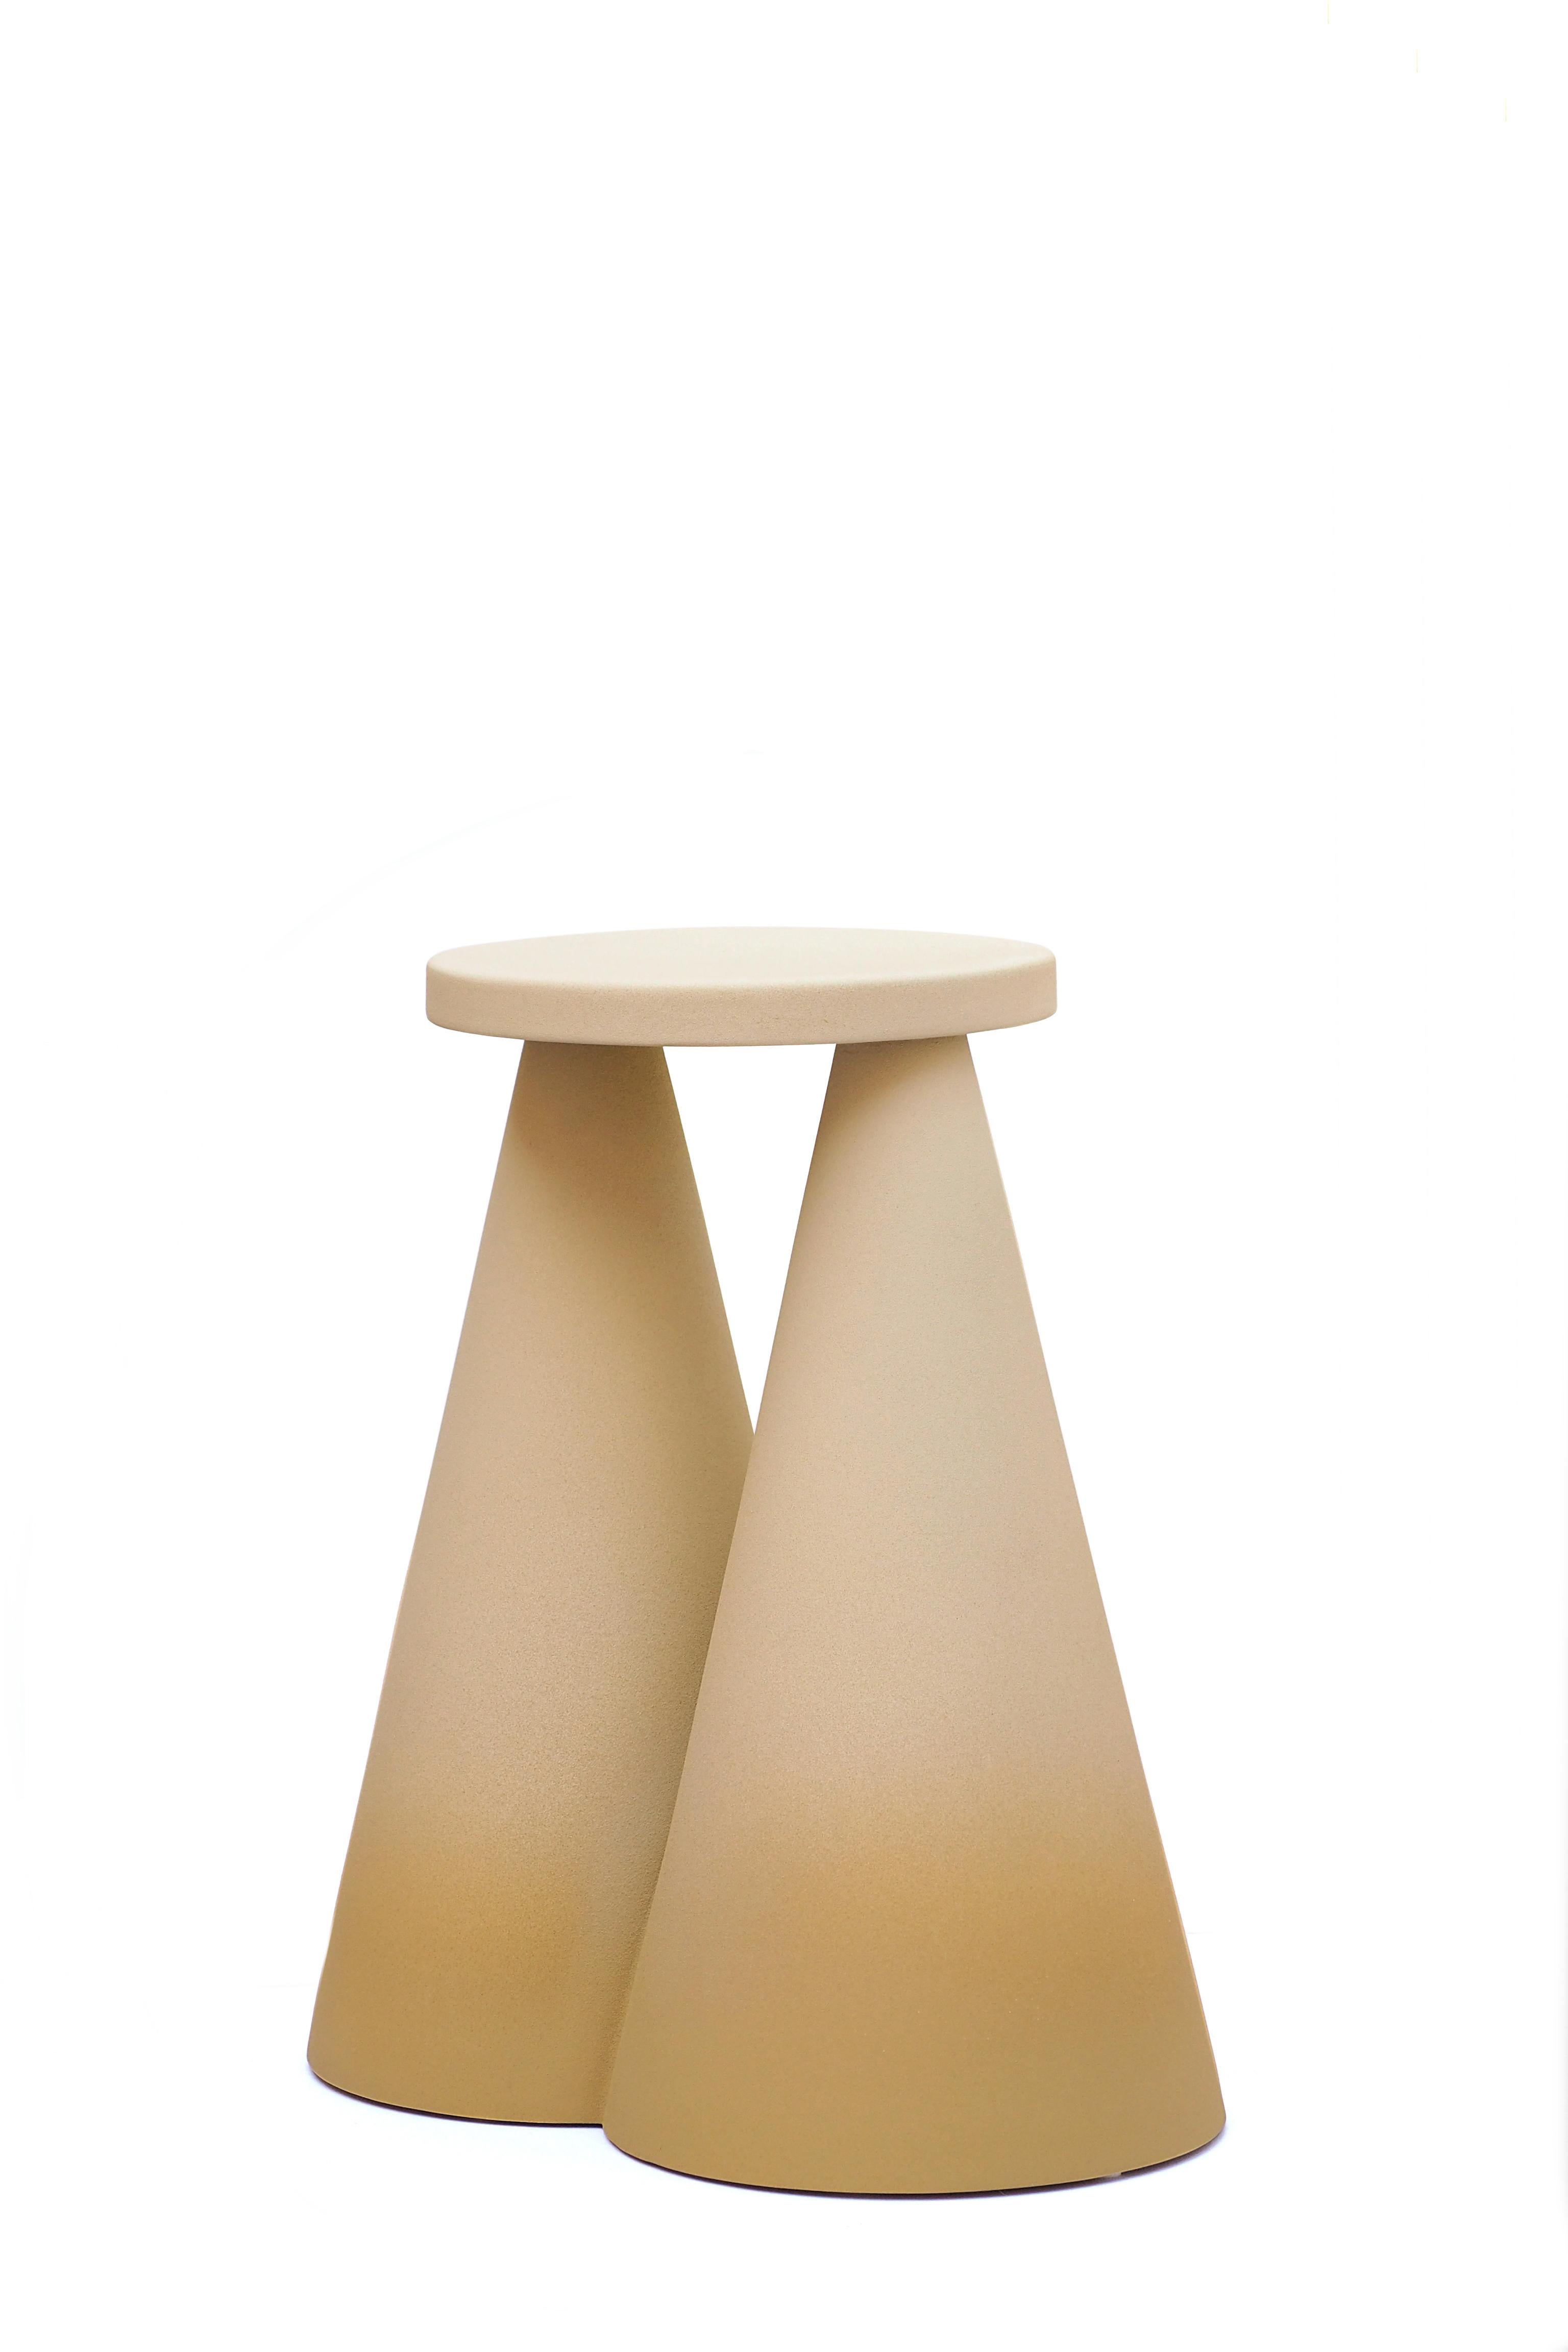 Honey Isola Side Table by Cara Davide
Dimensions: D 25 x W 43 x H 45 cm 
Materials: Ceramic /Rough touch finishing.
Also available in colors: Honey and Purple. Please contact us for more information. 

Isola side table is completely made in ceramic